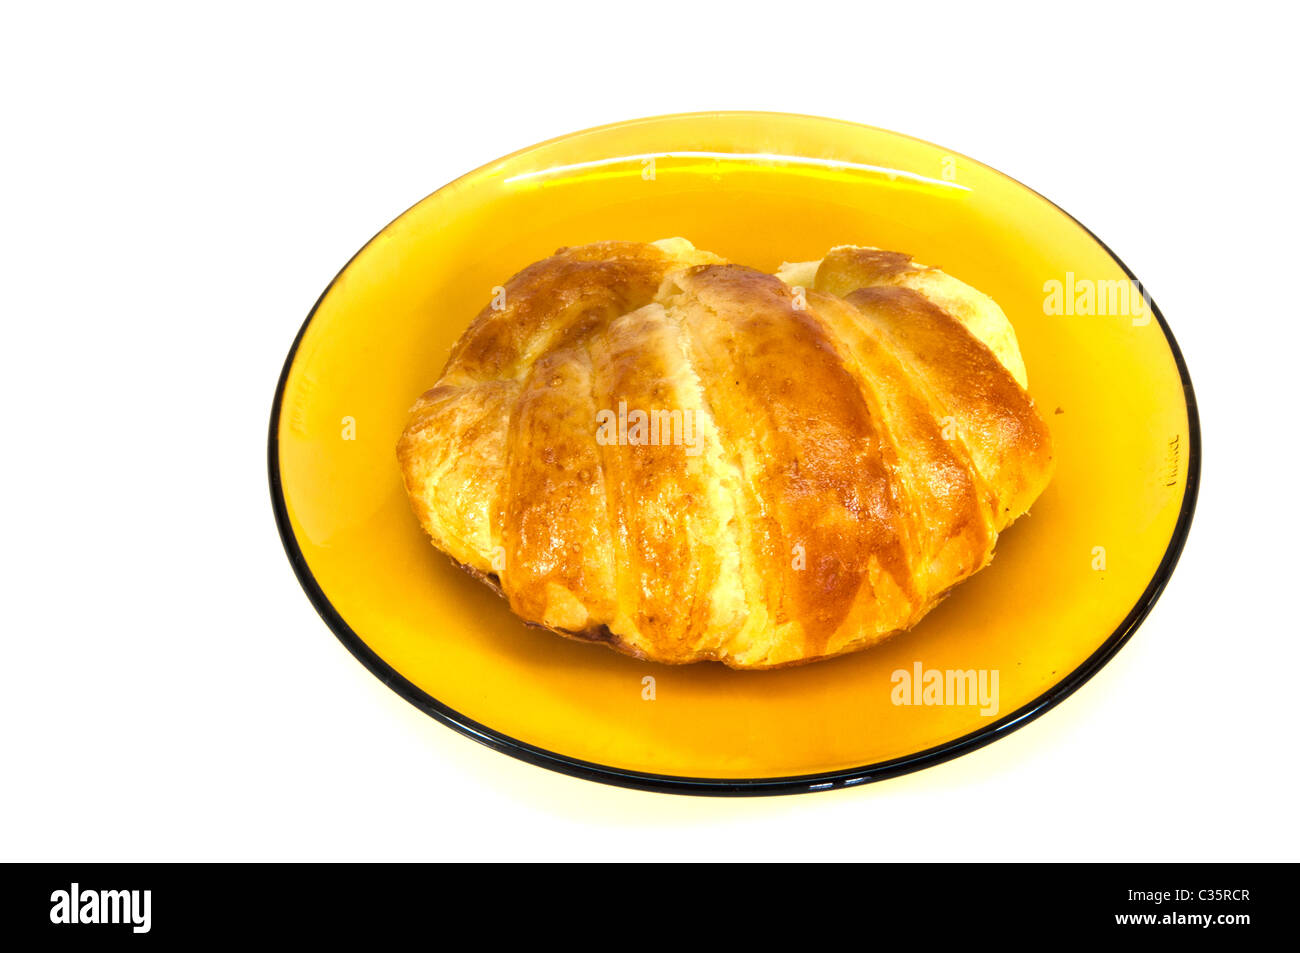 Croissant in white background Stock Photo